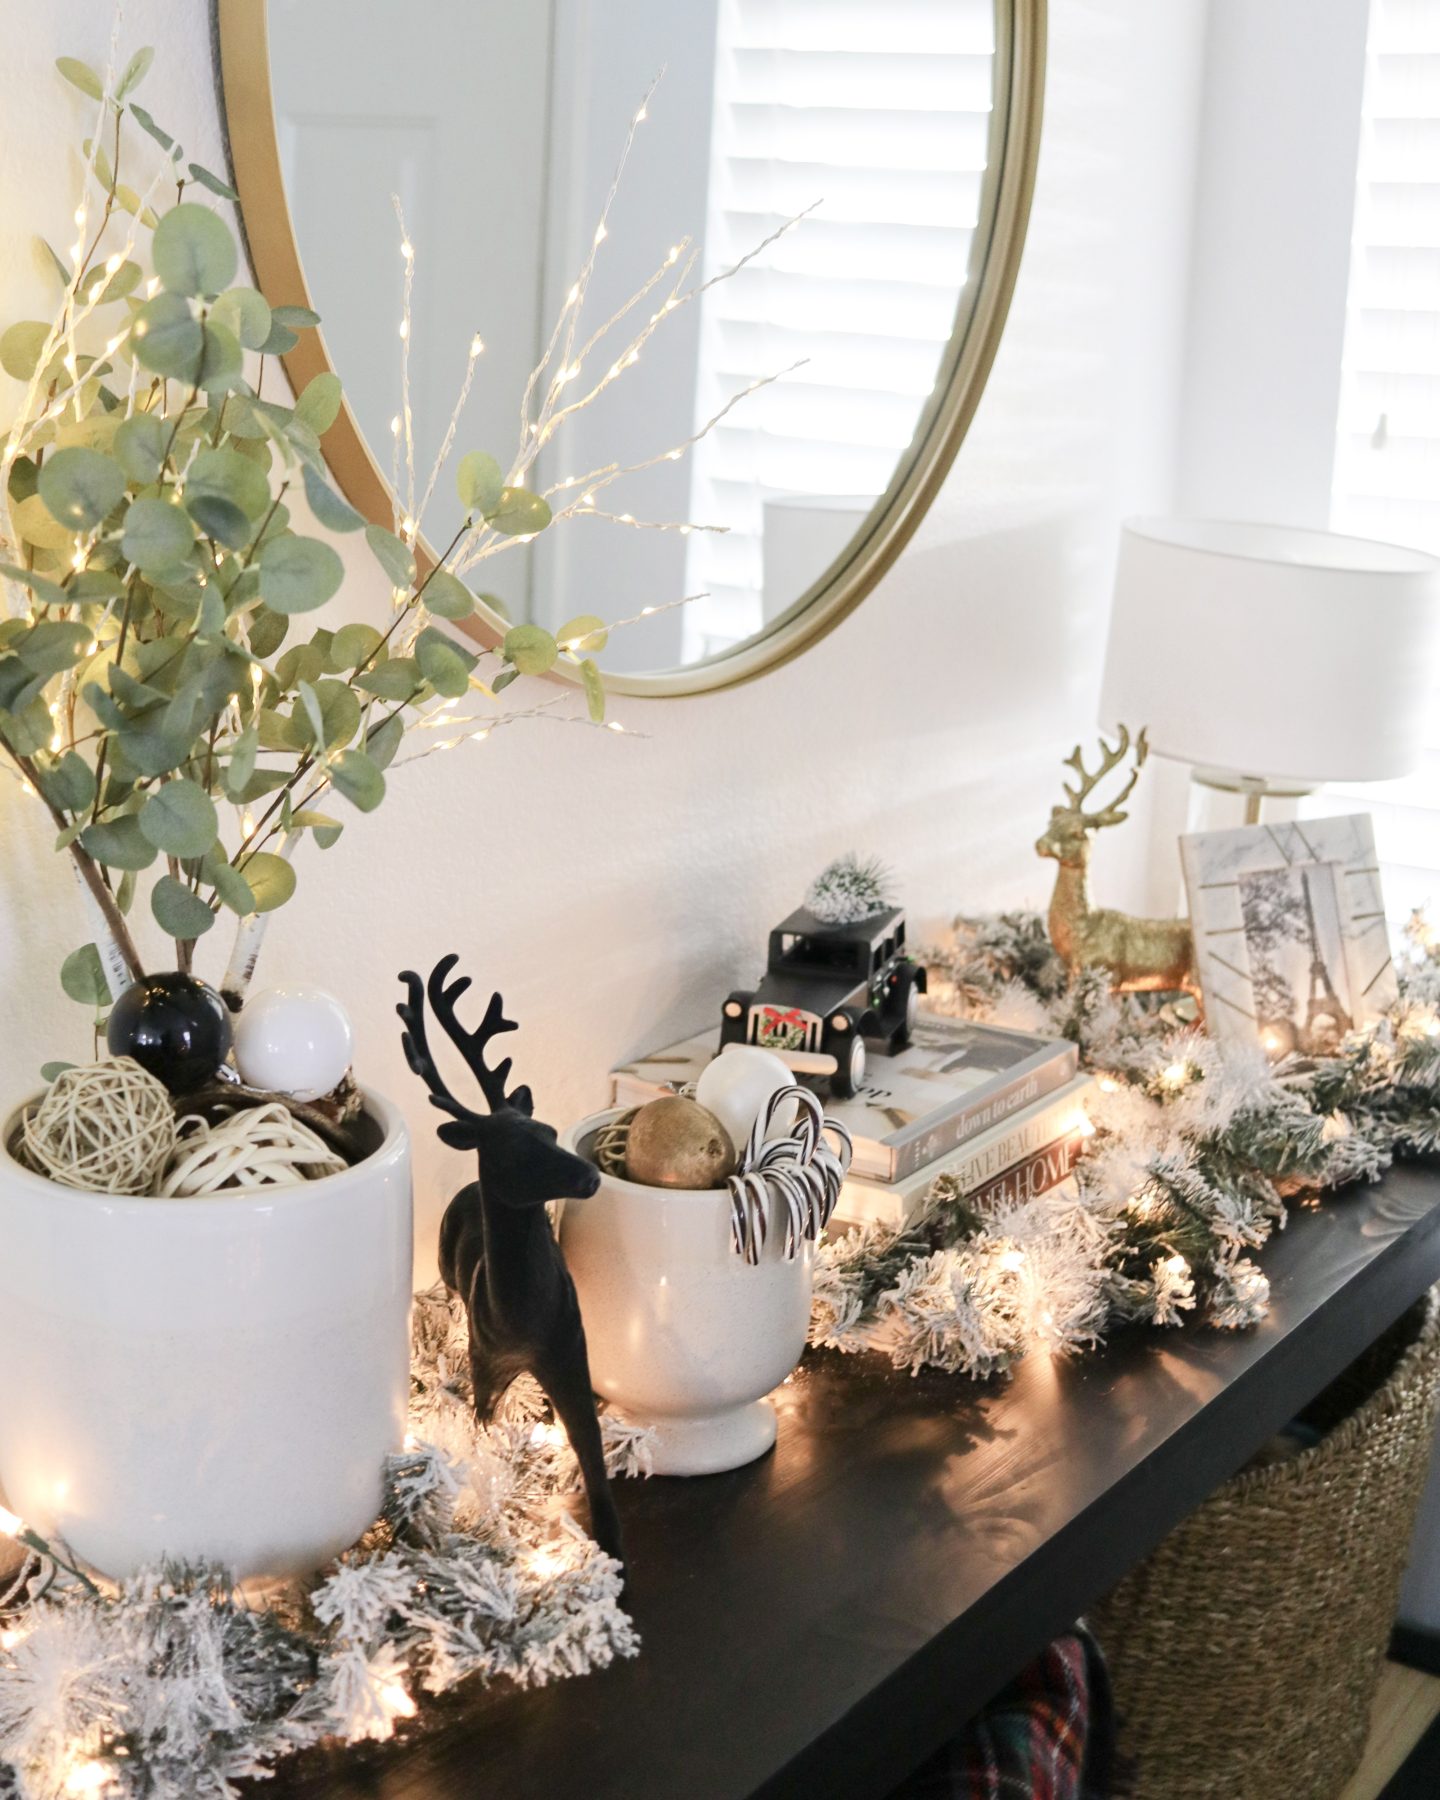 Holiday home decor from Target, entryway holiday decor